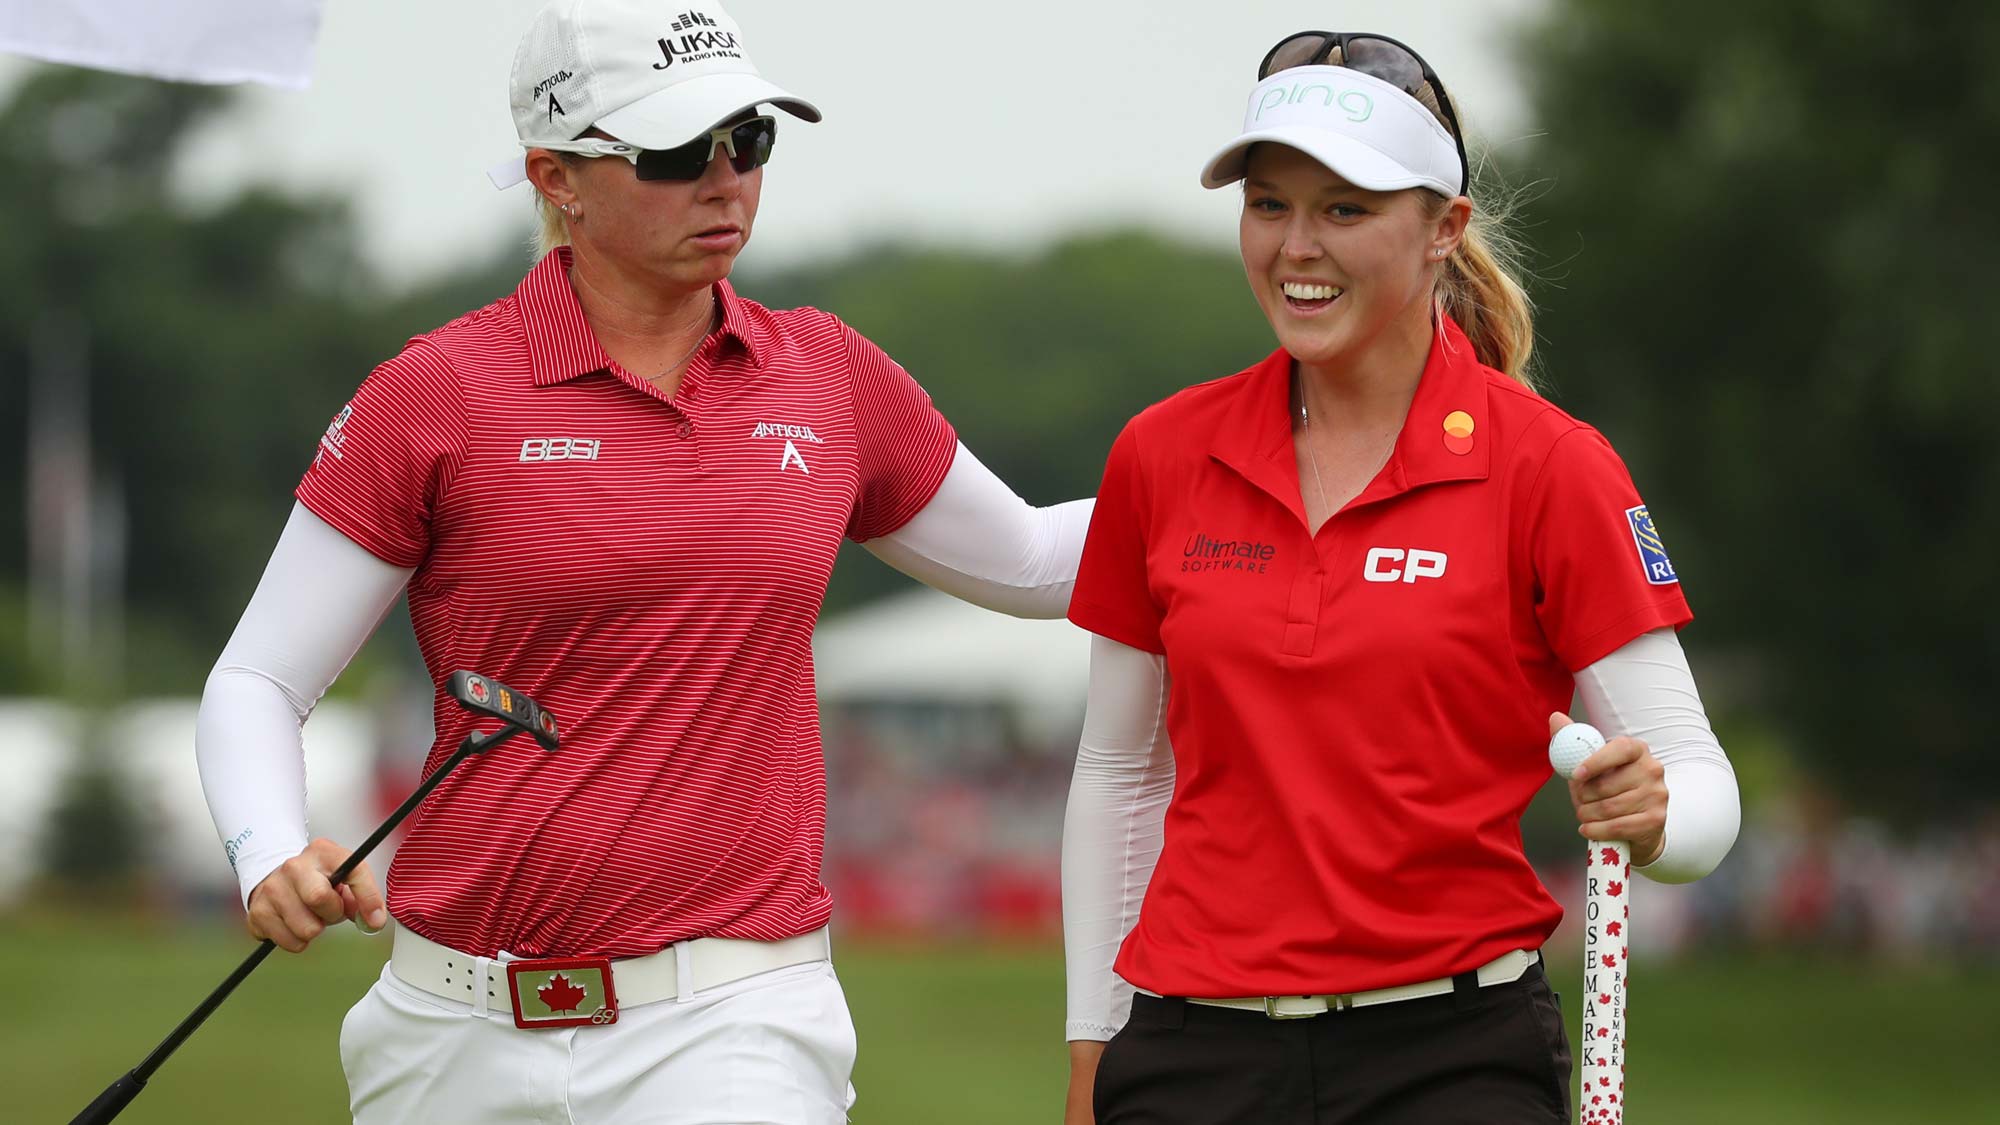 Teammates Brooke Henderson (R) and Alena Sharp walk off the first green during round two of the Dow Great Lakes Bay Invitational 